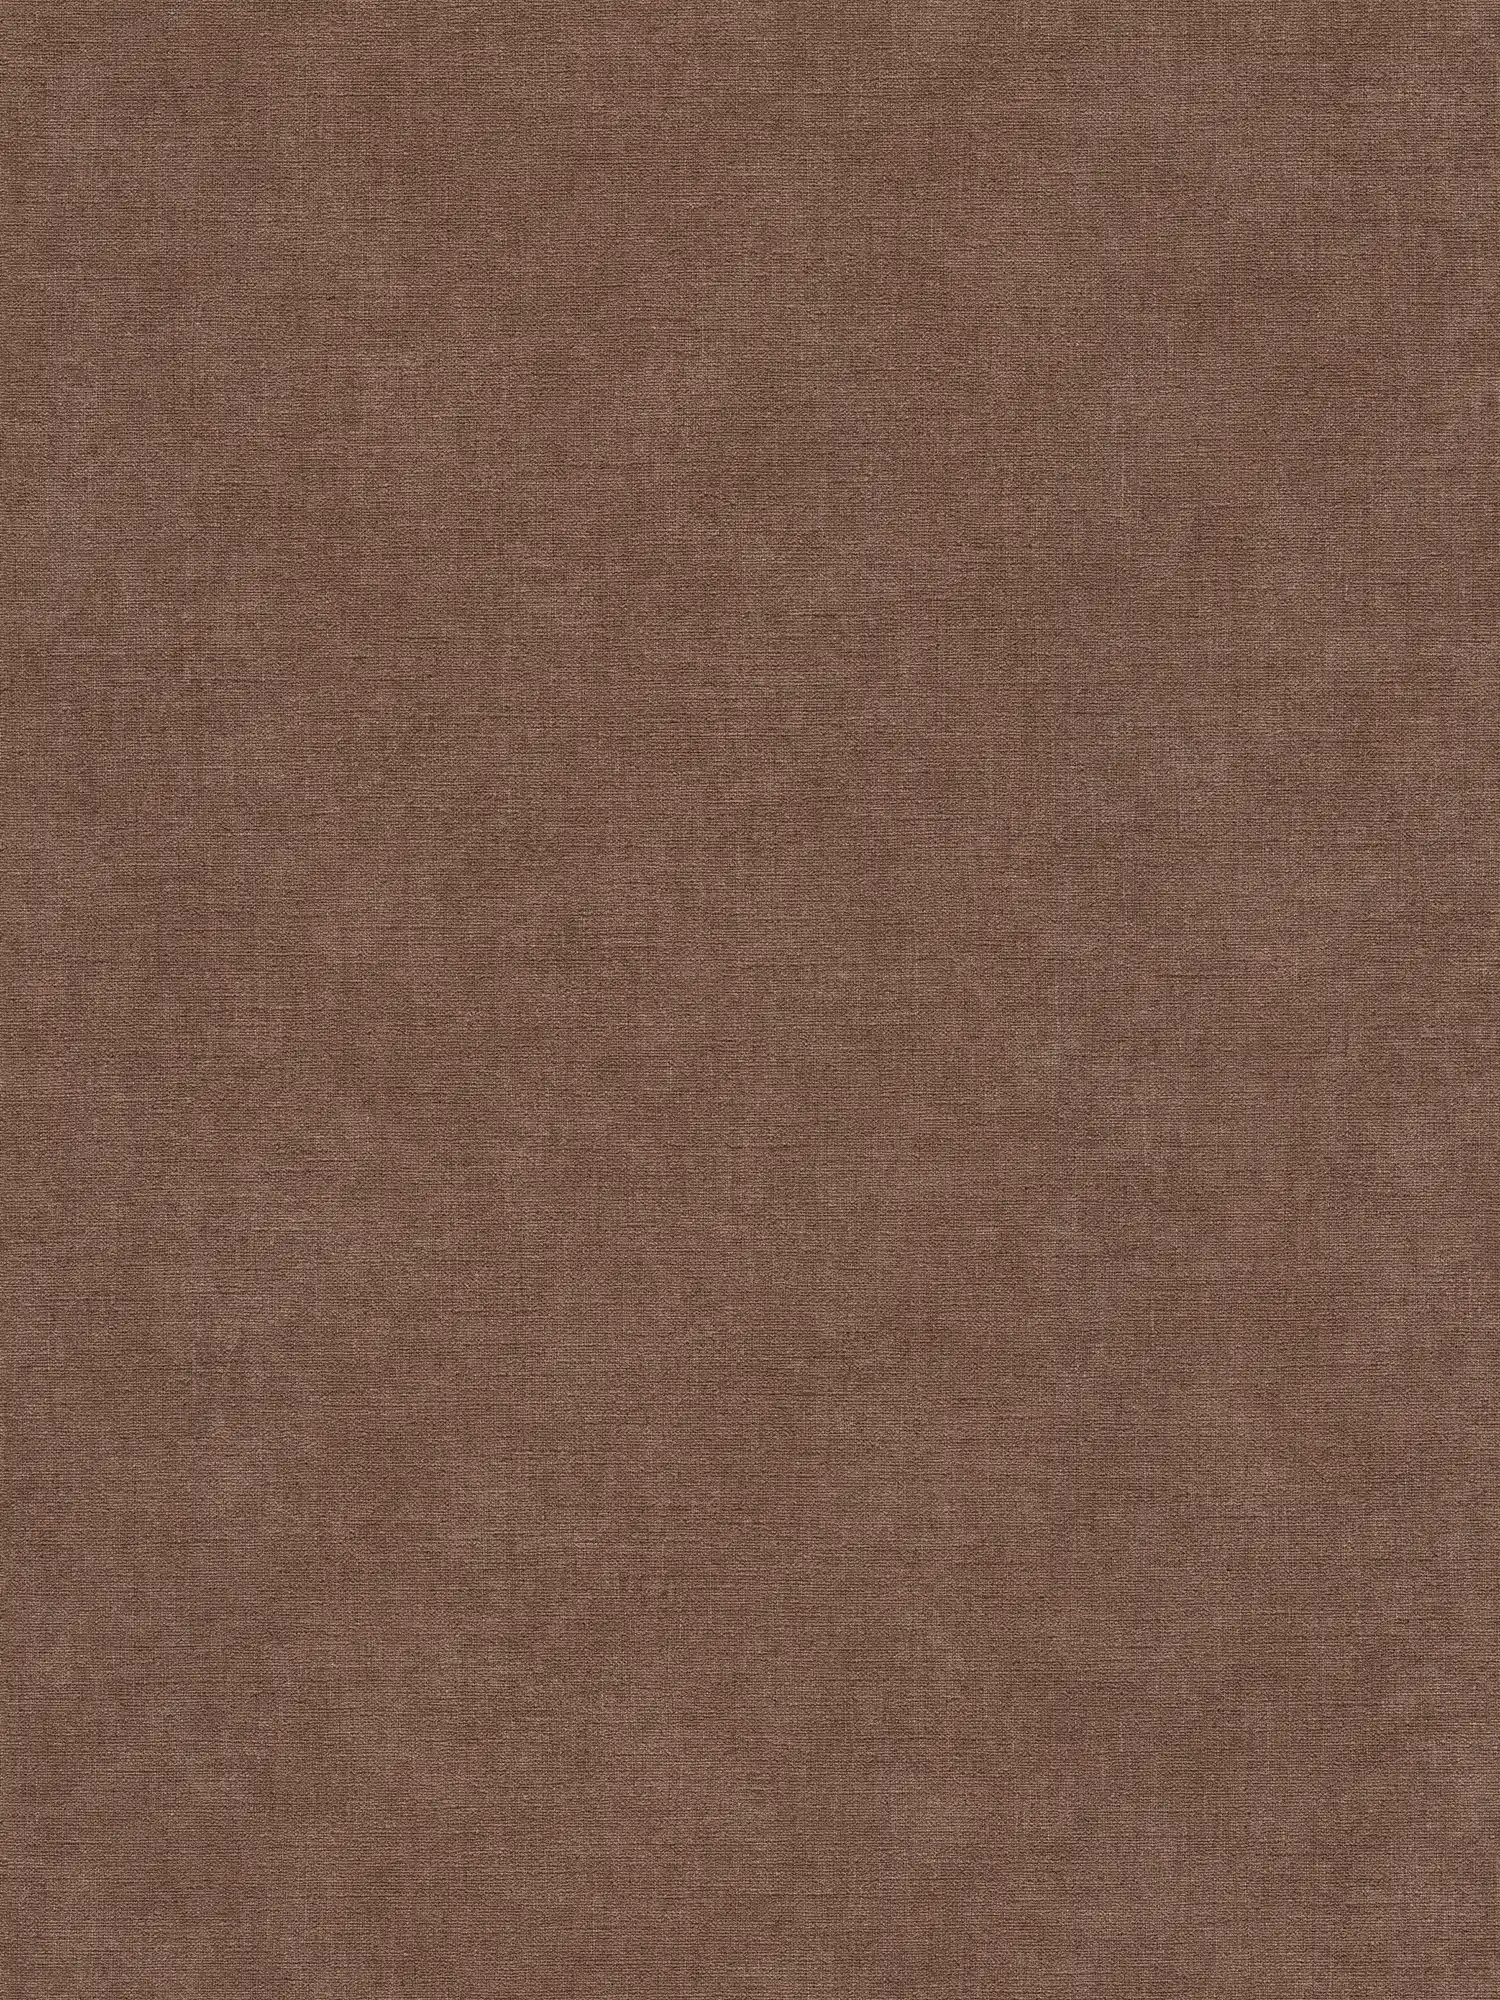 Single-coloured non-woven wallpaper with a light texture - brown, red
